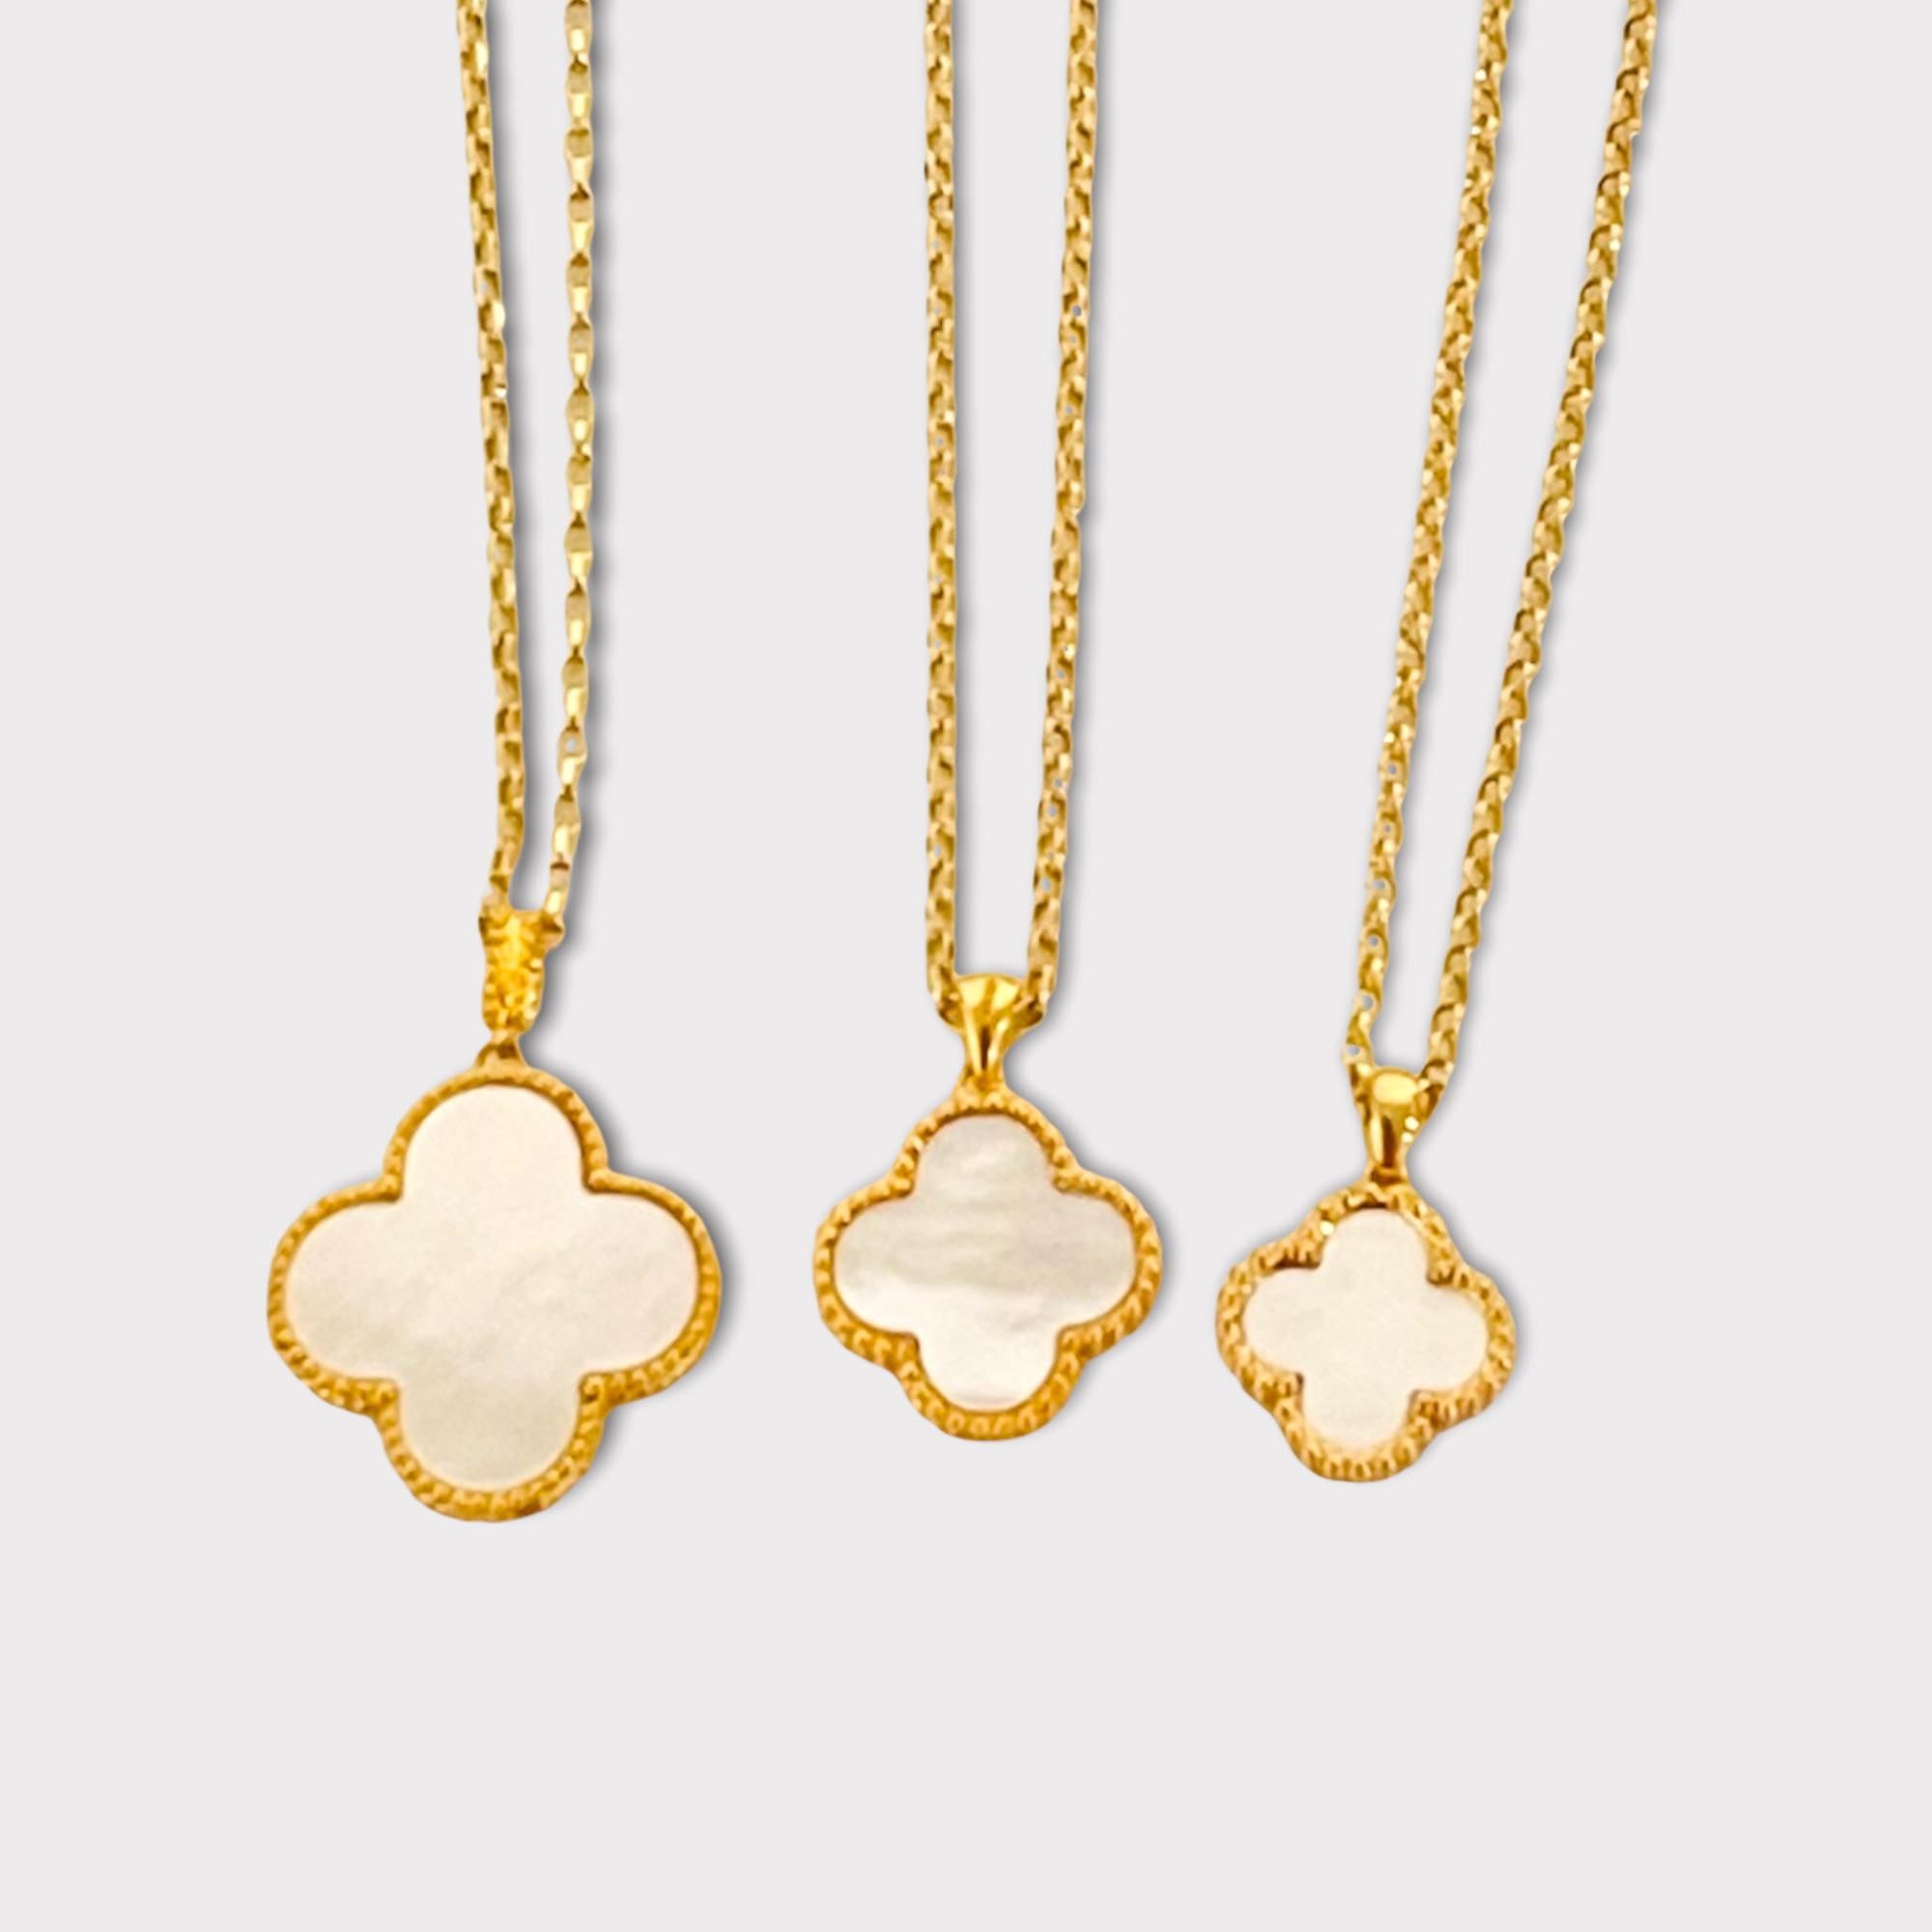 Clover Pendant Necklace In Yellow Gold